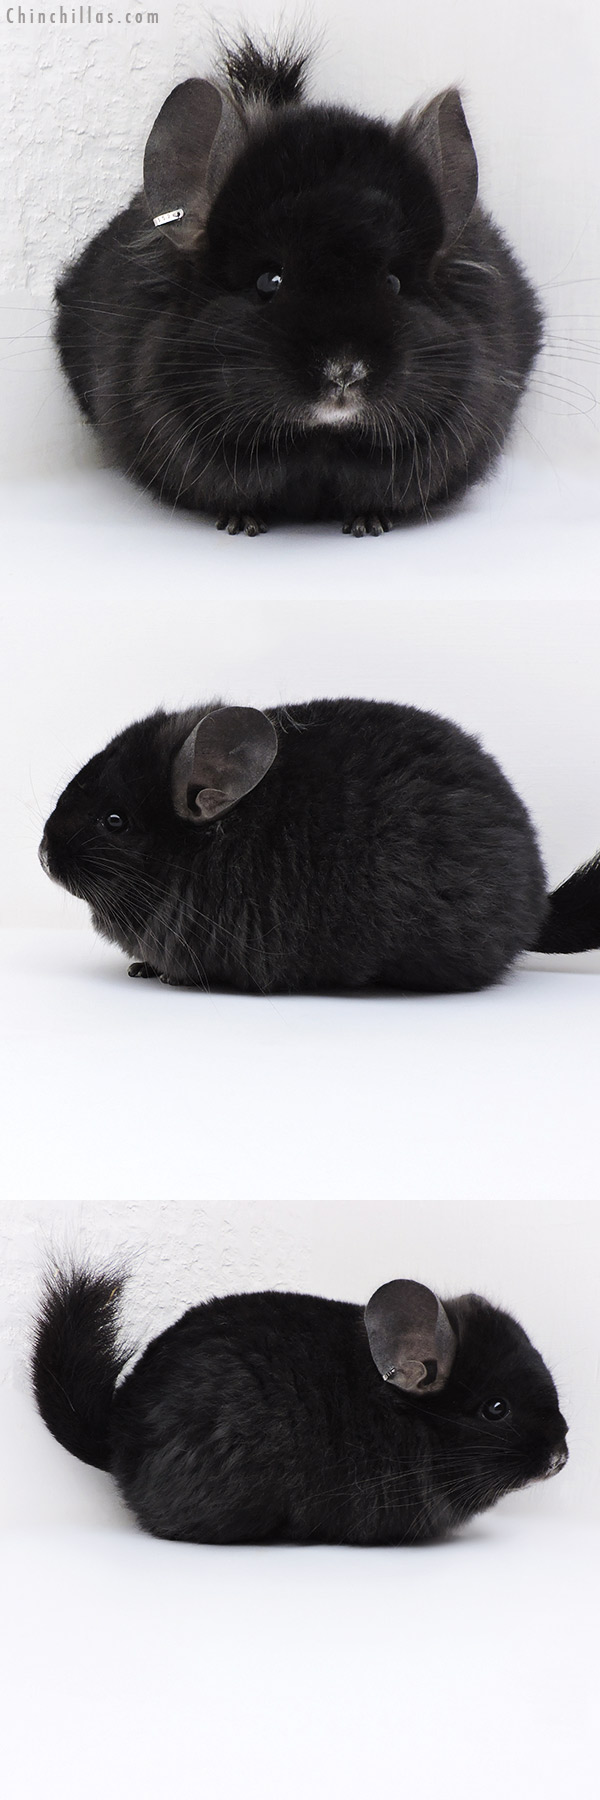 Chinchilla or related item offered for sale or export on Chinchillas.com - 18017 Exceptional Ebony  Royal Persian Angora ( Locken Carrier ) Female Chinchilla